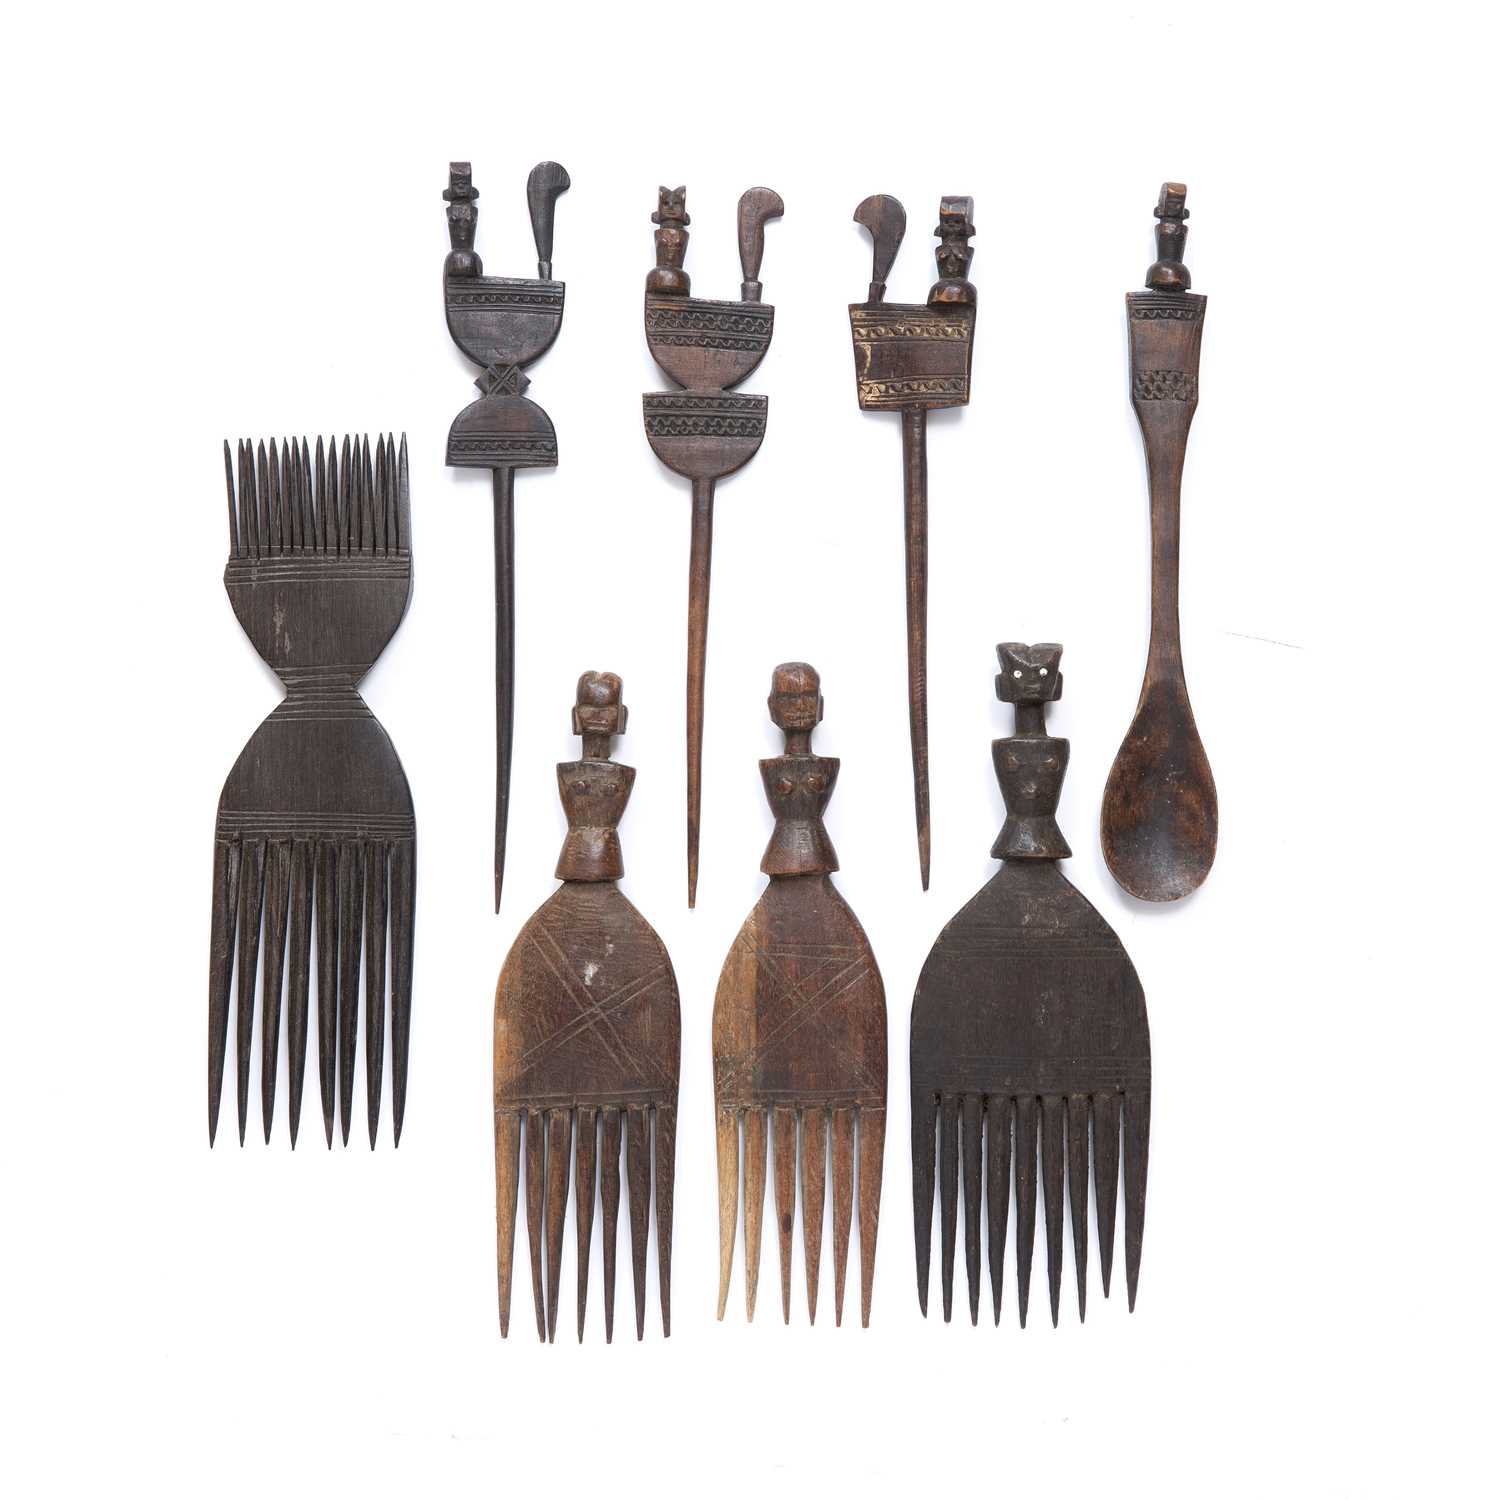 African Hemba hair combs and spikes, with a spoon, all carved wood with scratch work decoration (